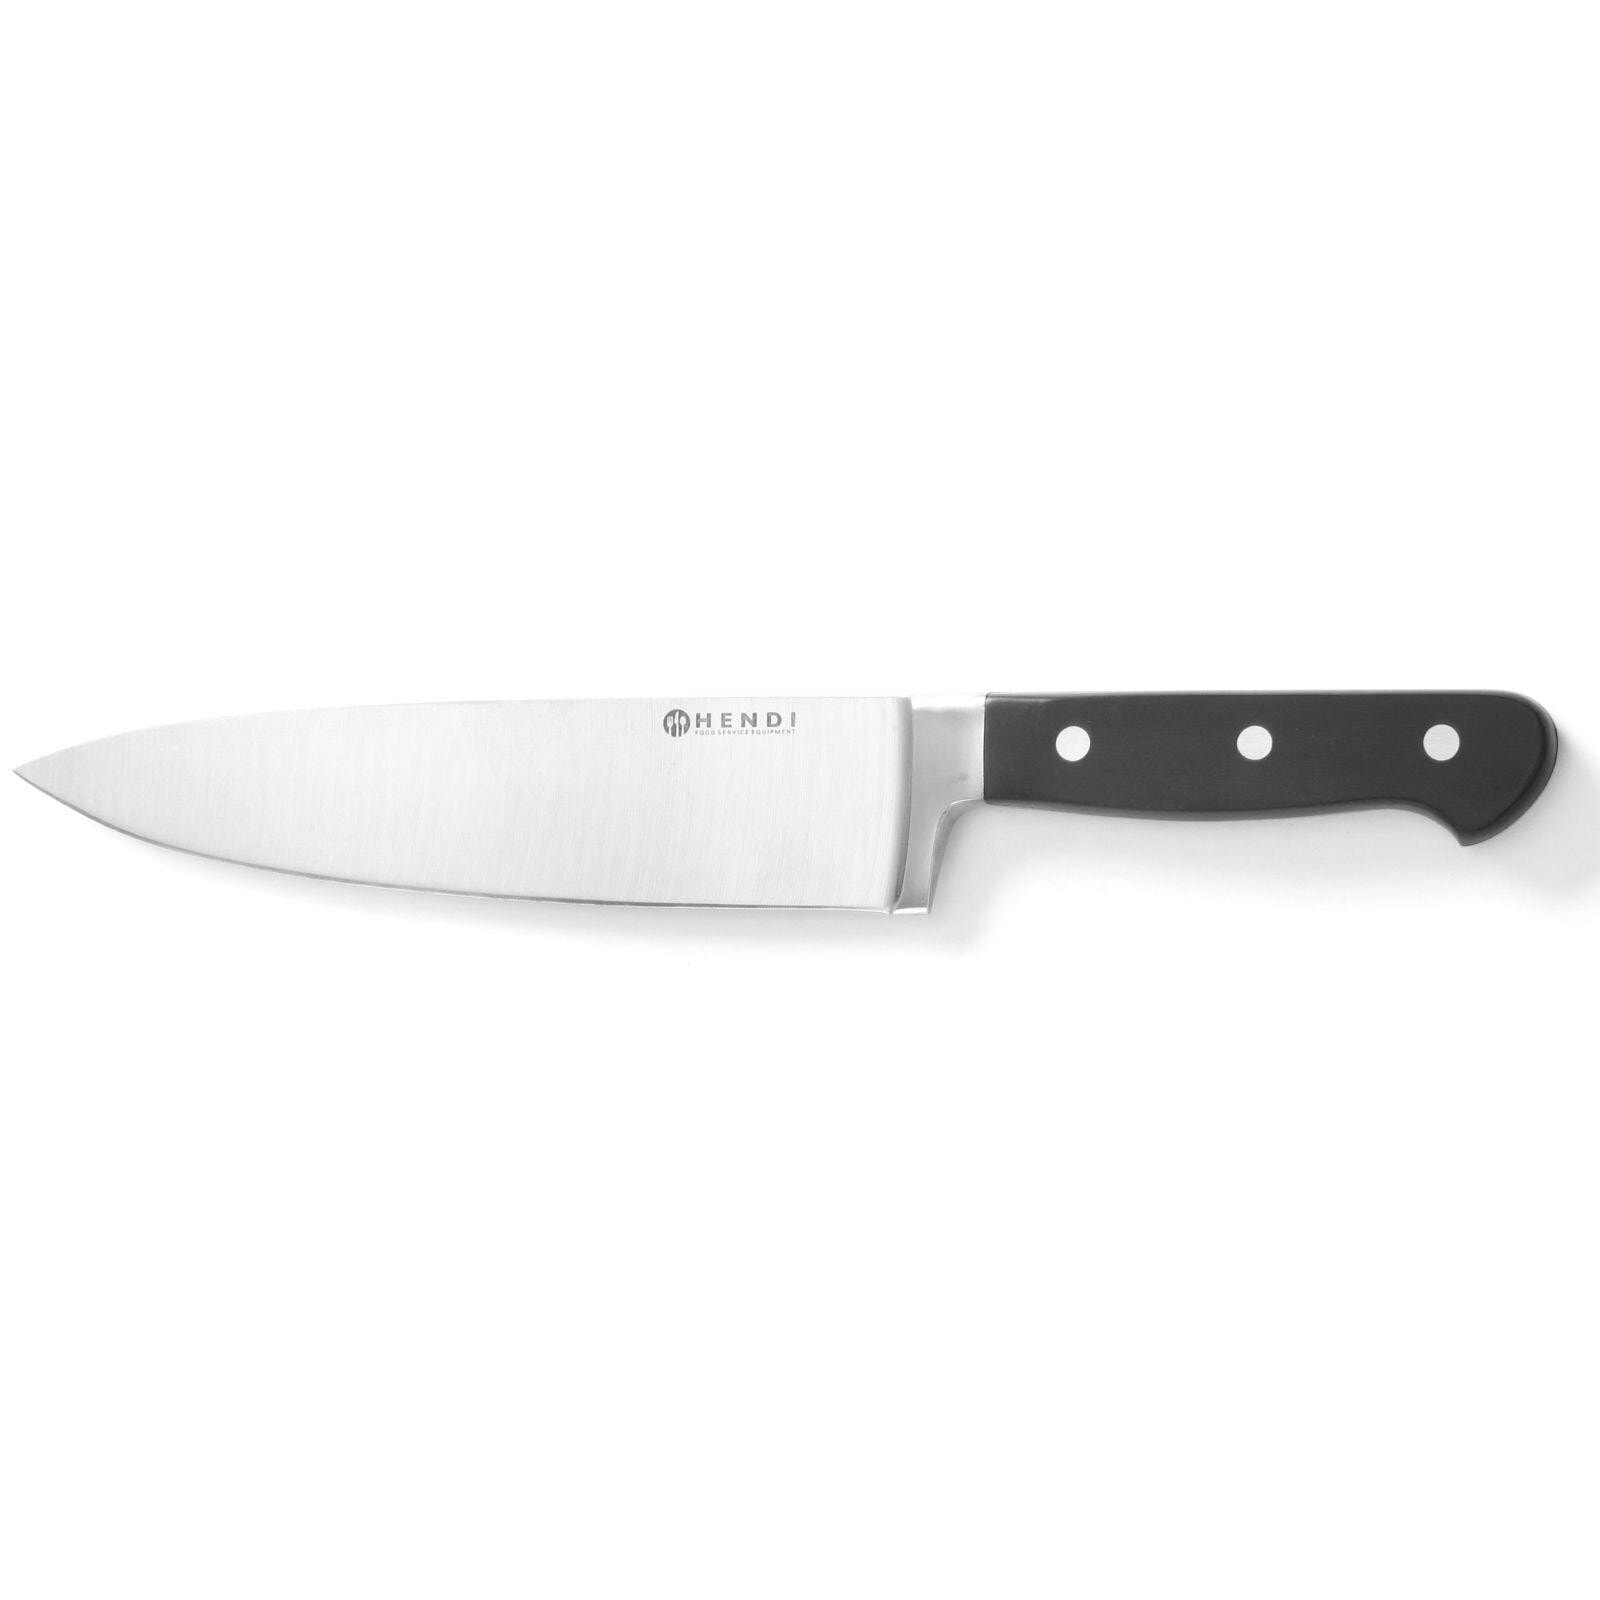 Professional chef's chef's knife forged steel Kitchen Line 200 mm - Hendi 781319